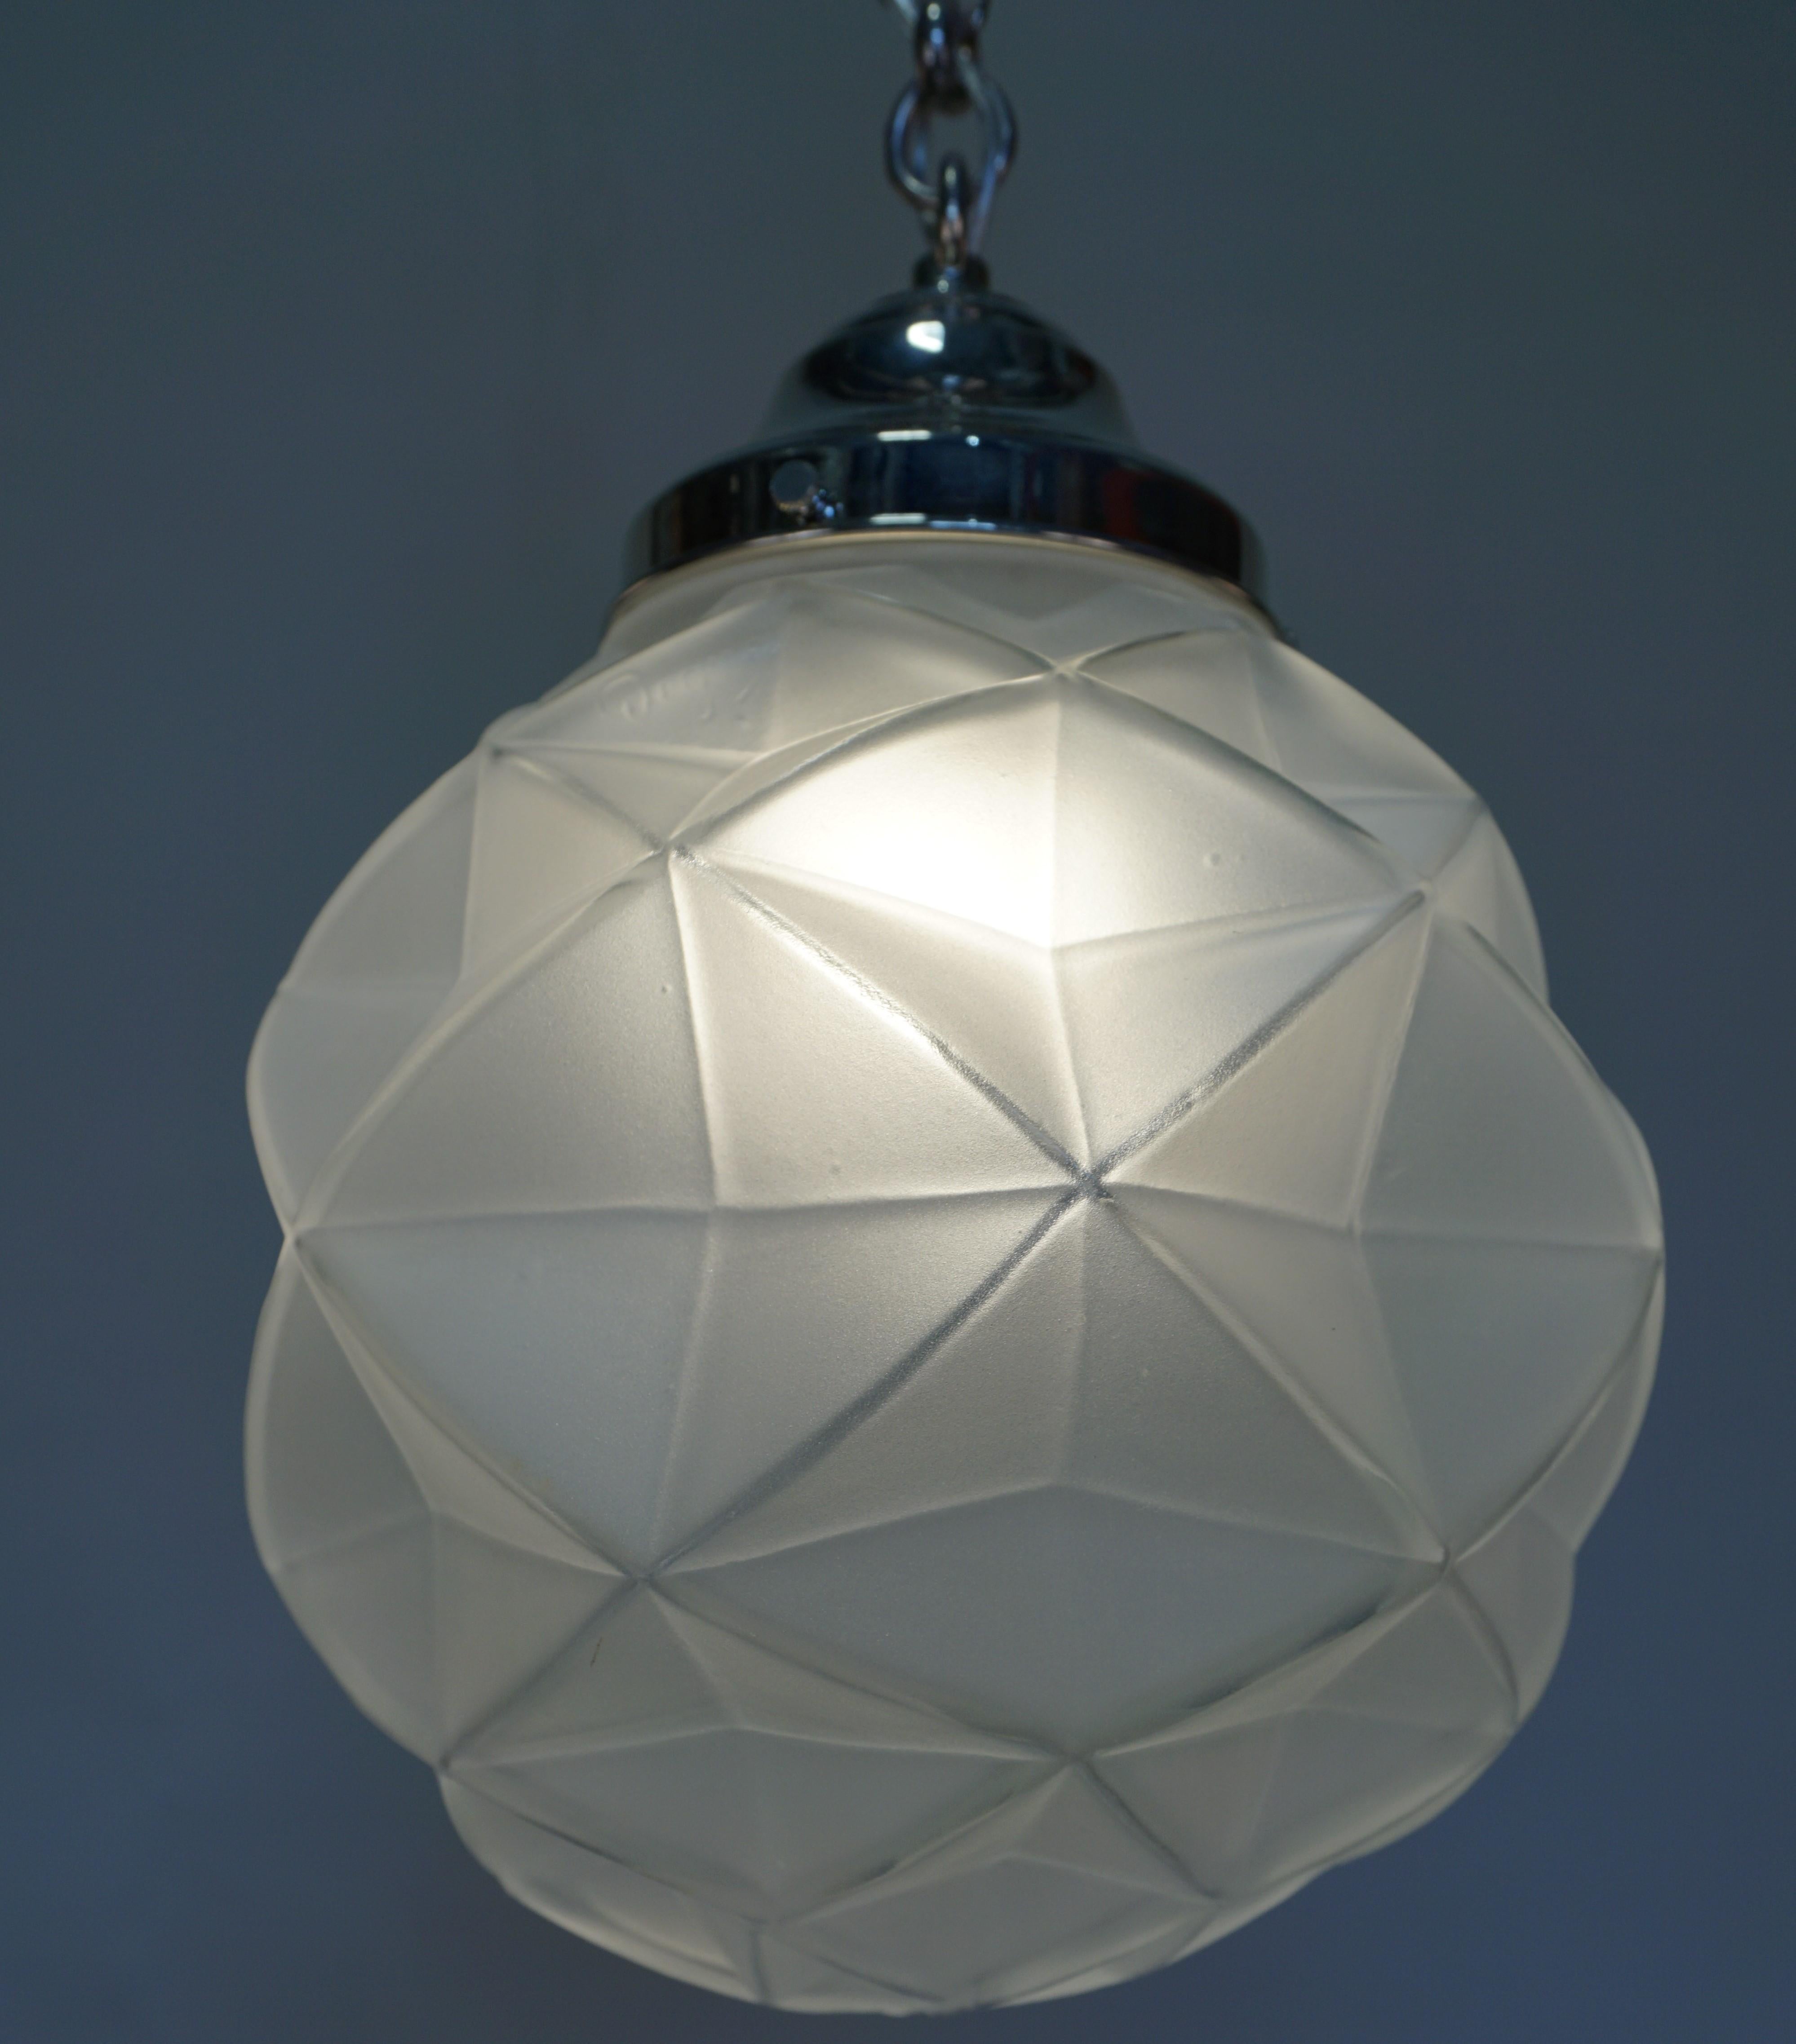 Pair of 1920s geometric glass with nickel hardware pendant chandelier.